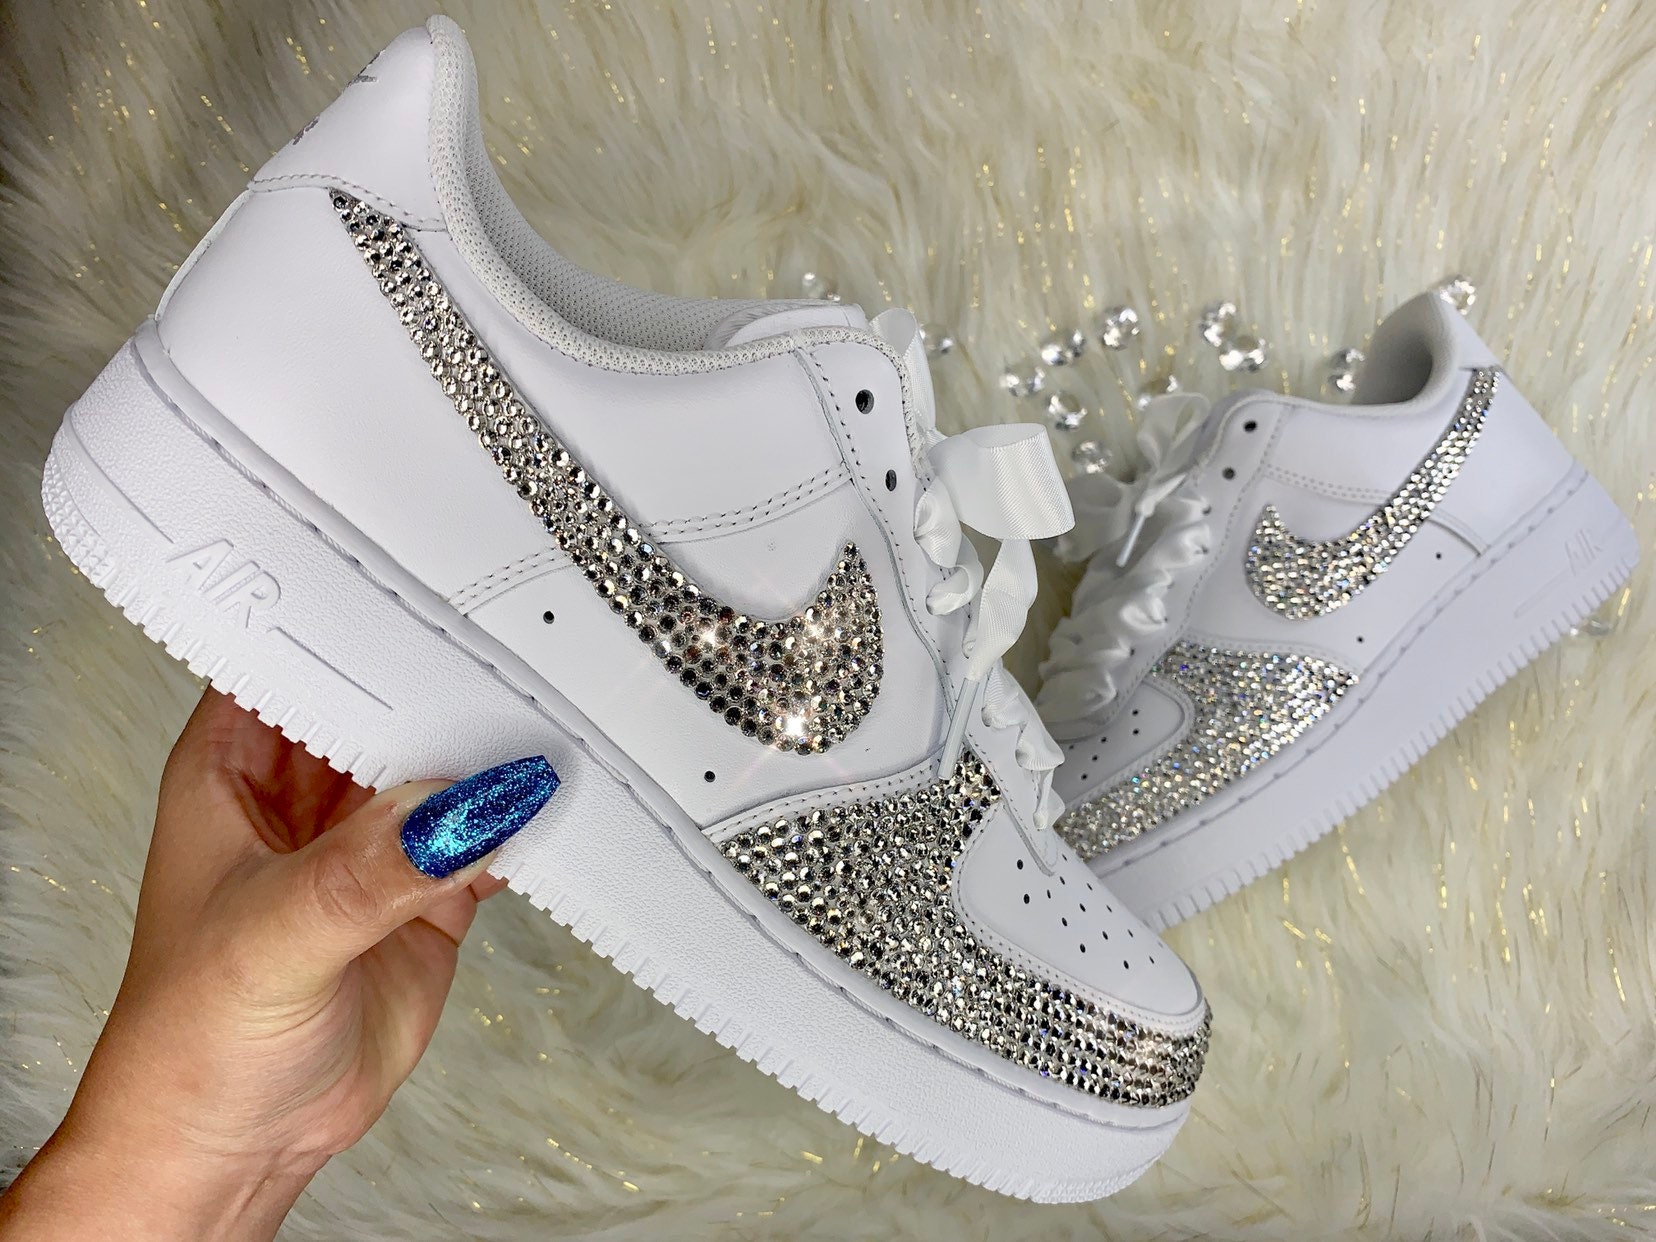 Are These Tiffany Inspired Nike Sneakers With Swarovski Crystals